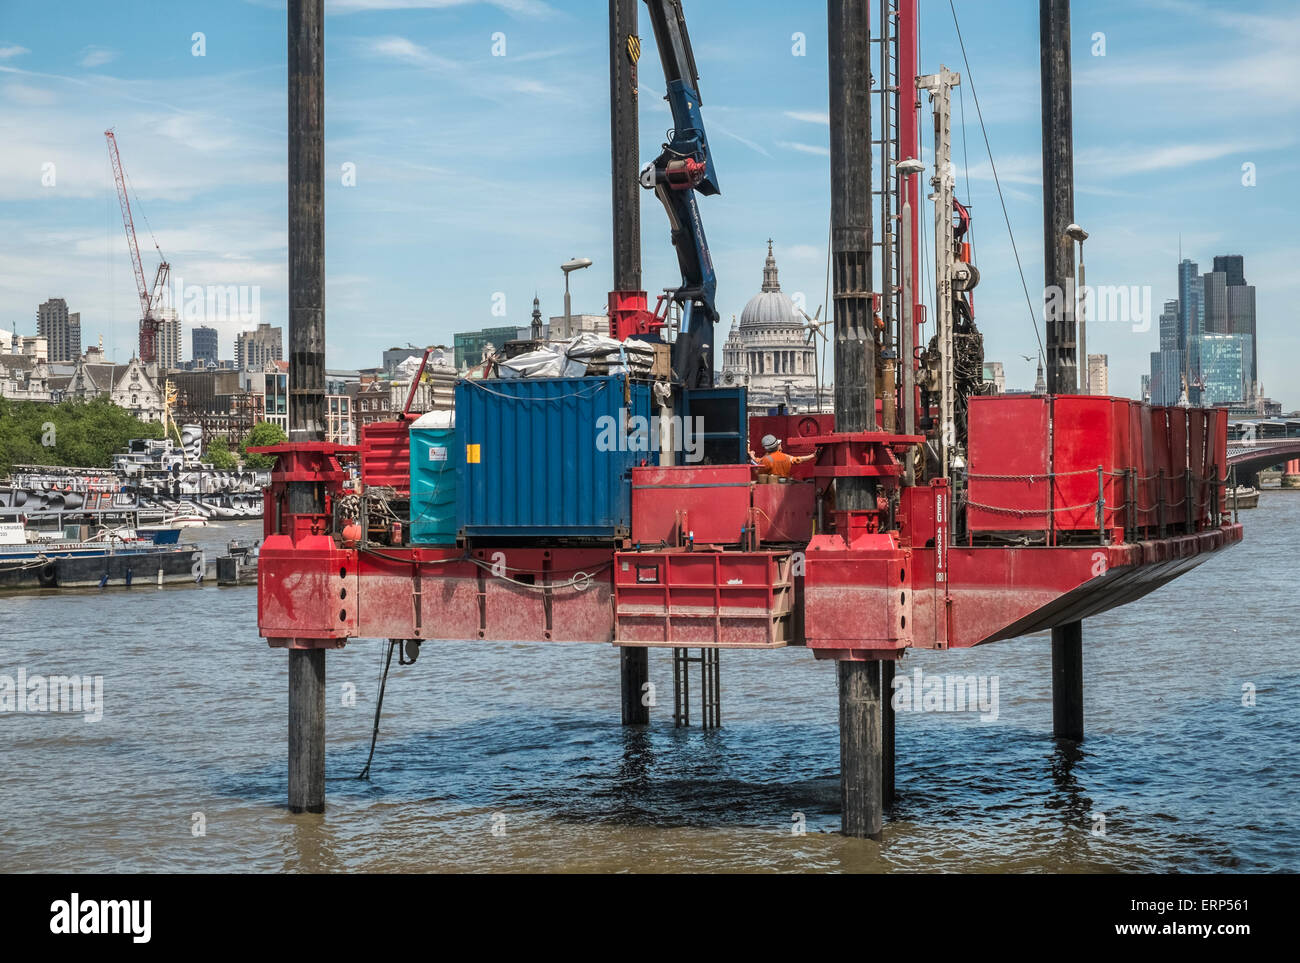 Drilling rig on River Thames, London, with St Pauls Cathedral in skyline background. Stock Photo